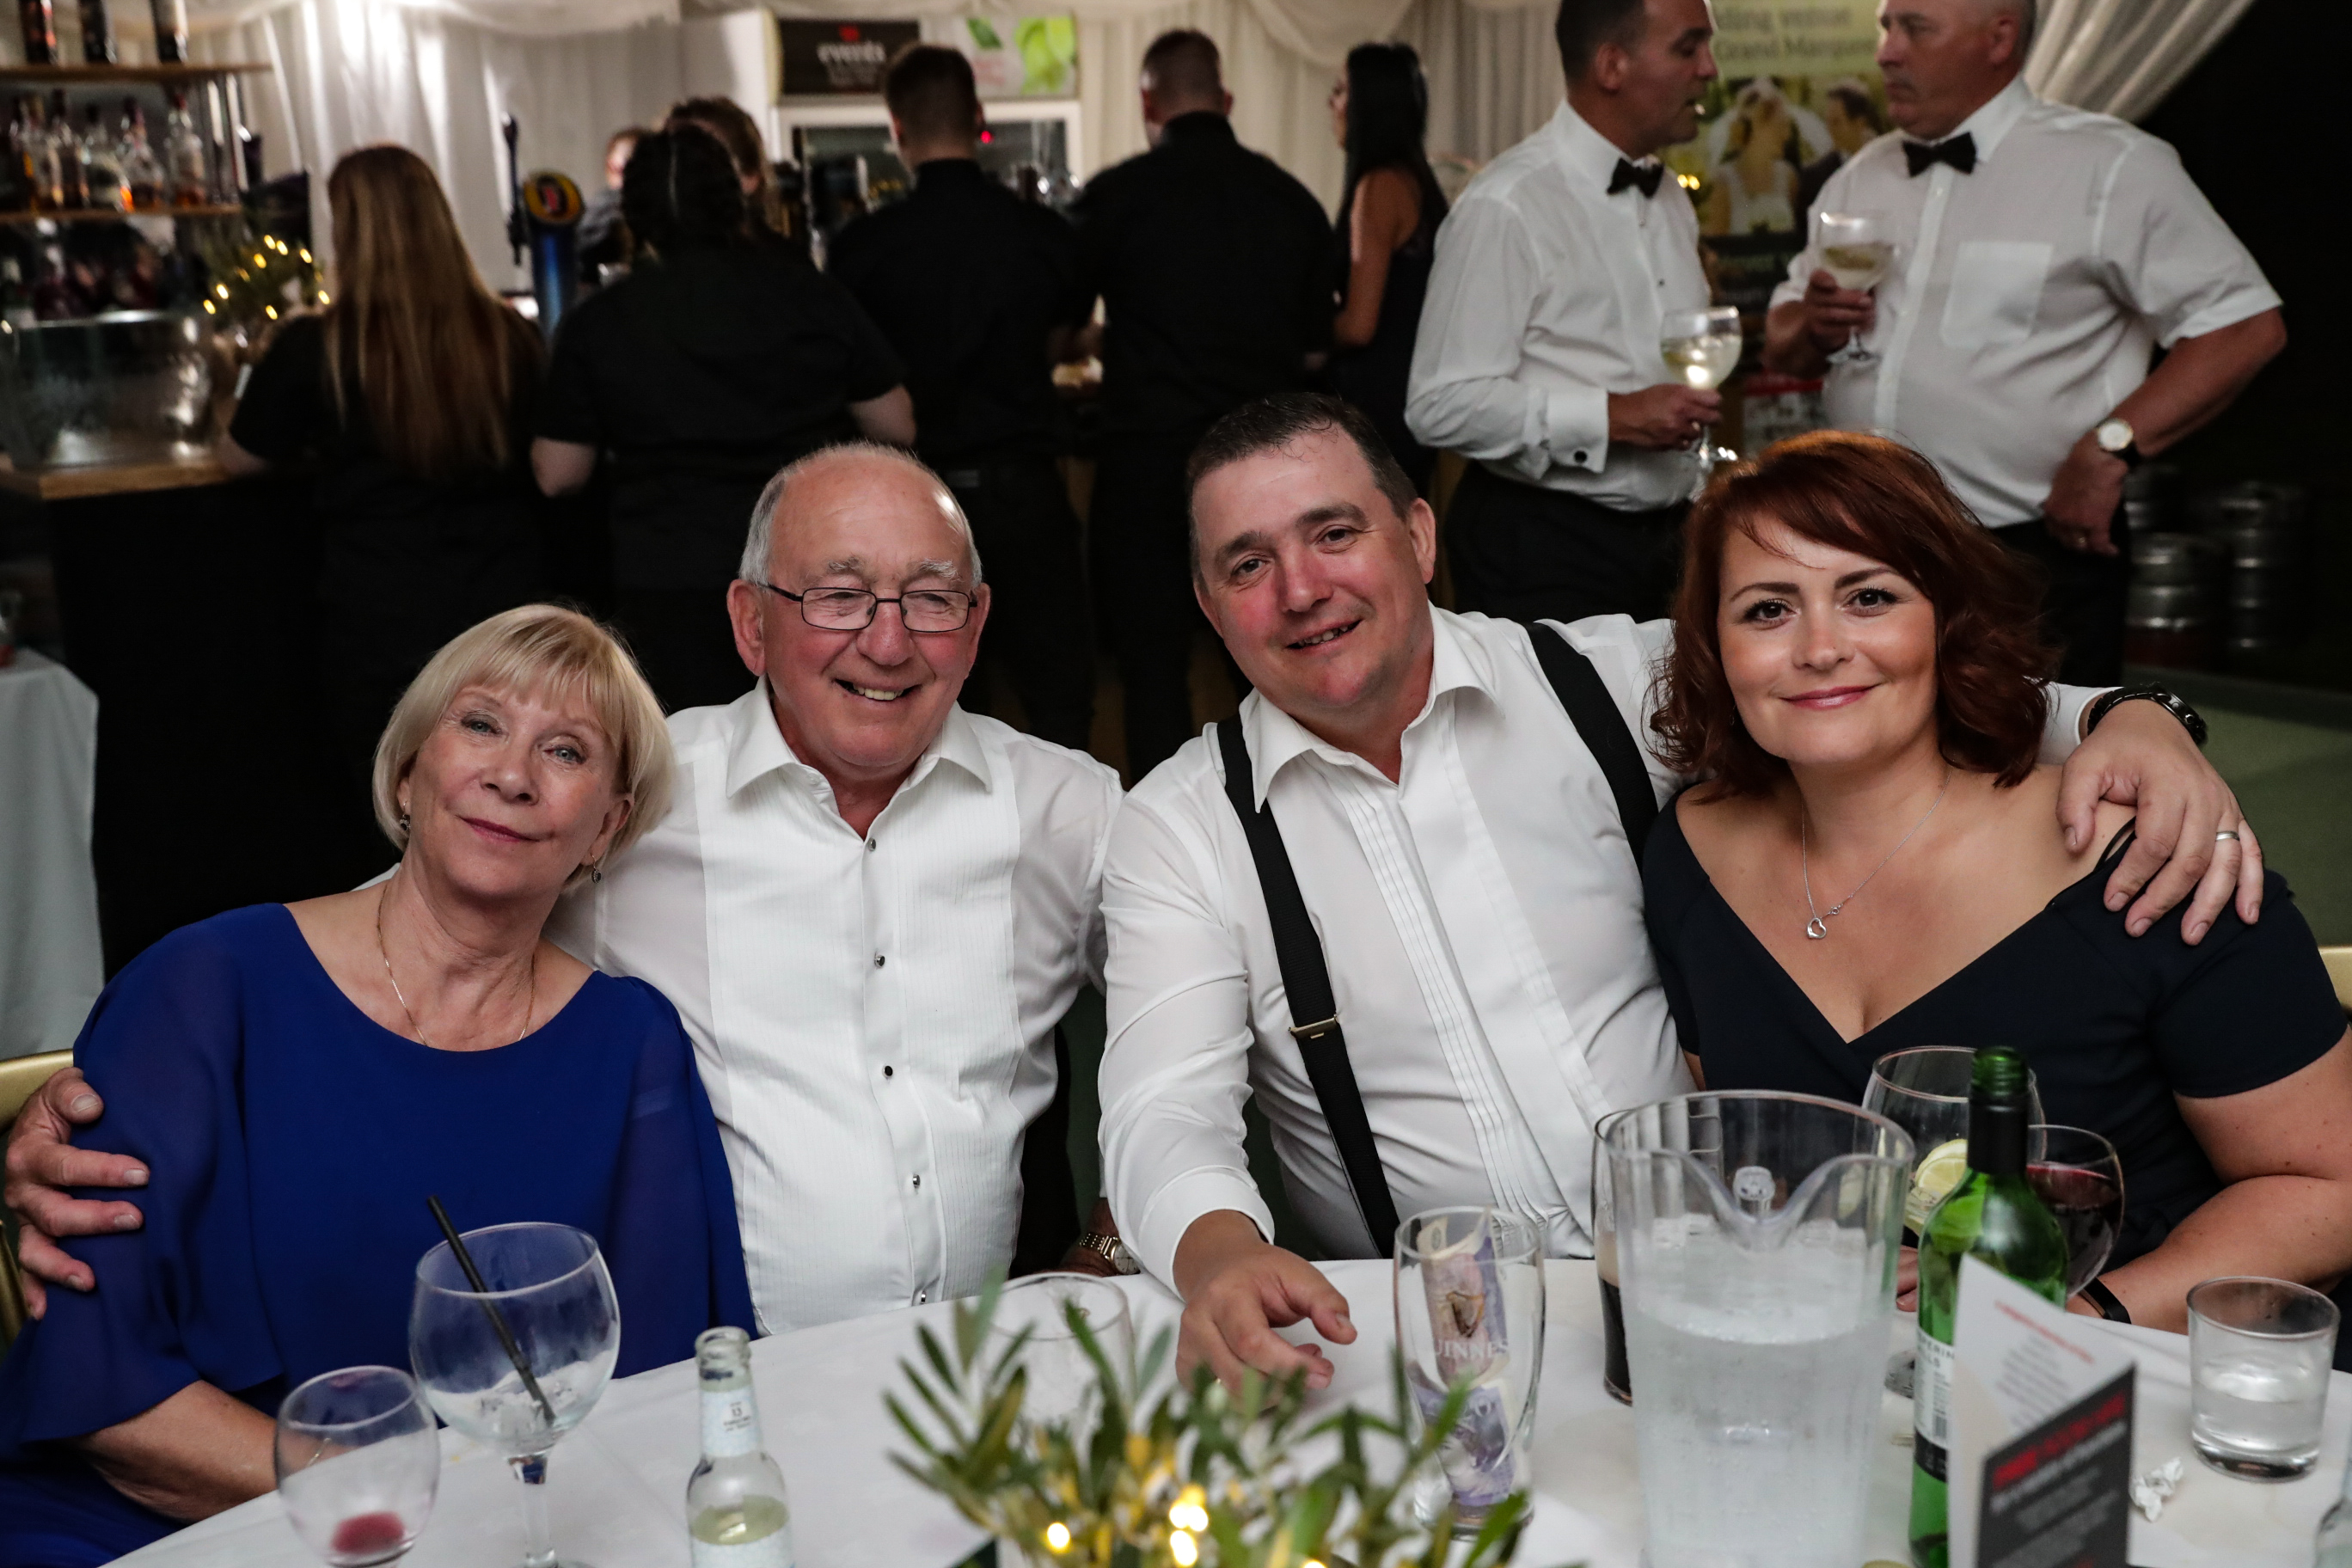 Burntwood Rugby Club Summer Ball 2019